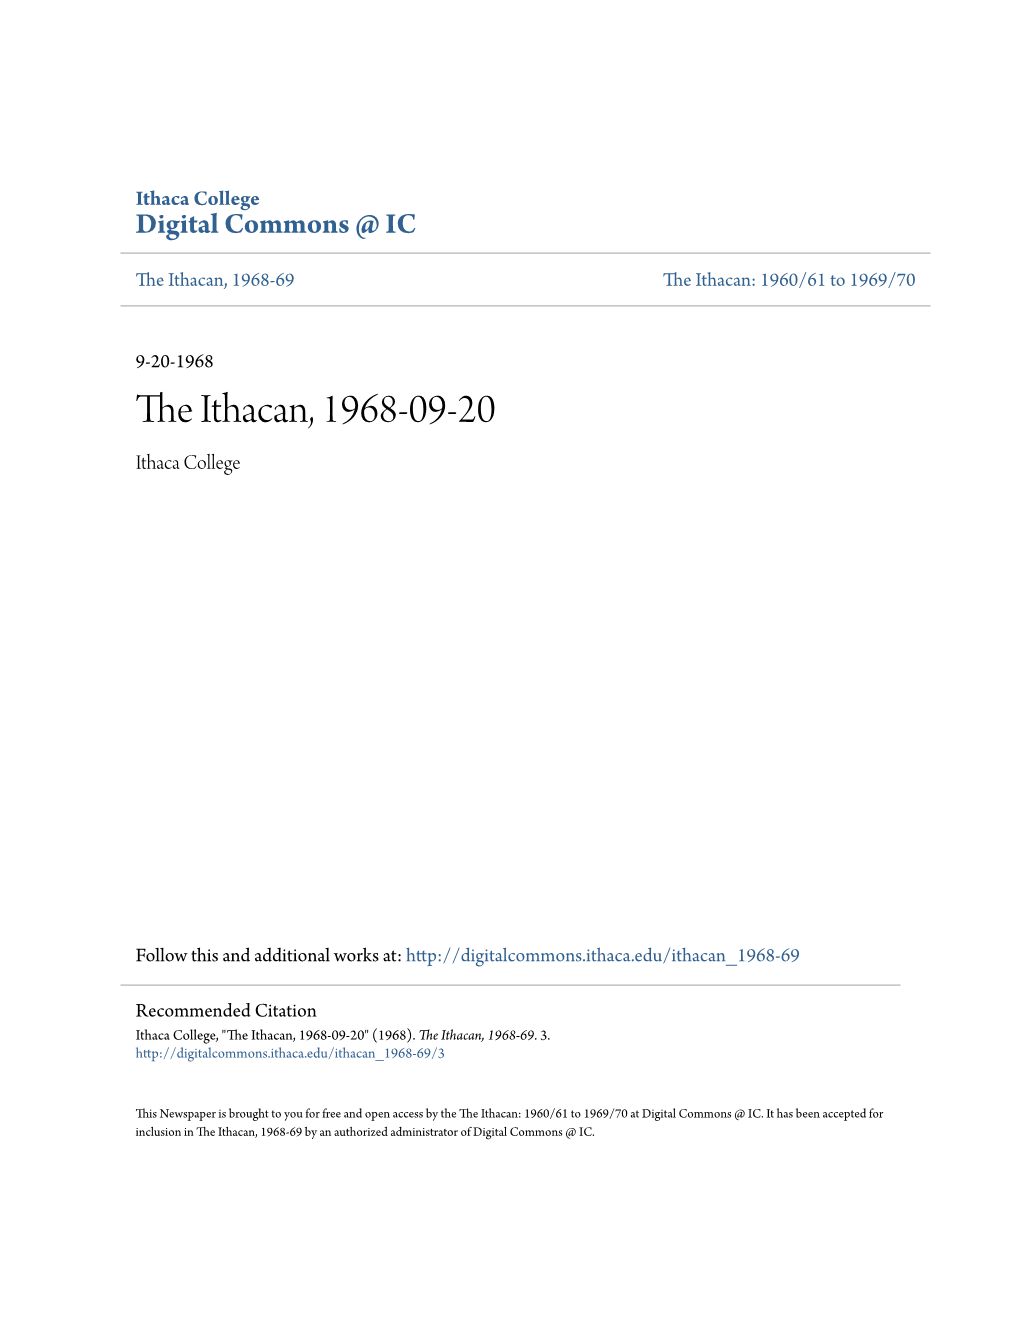 The Ithacan, 1968-09-20